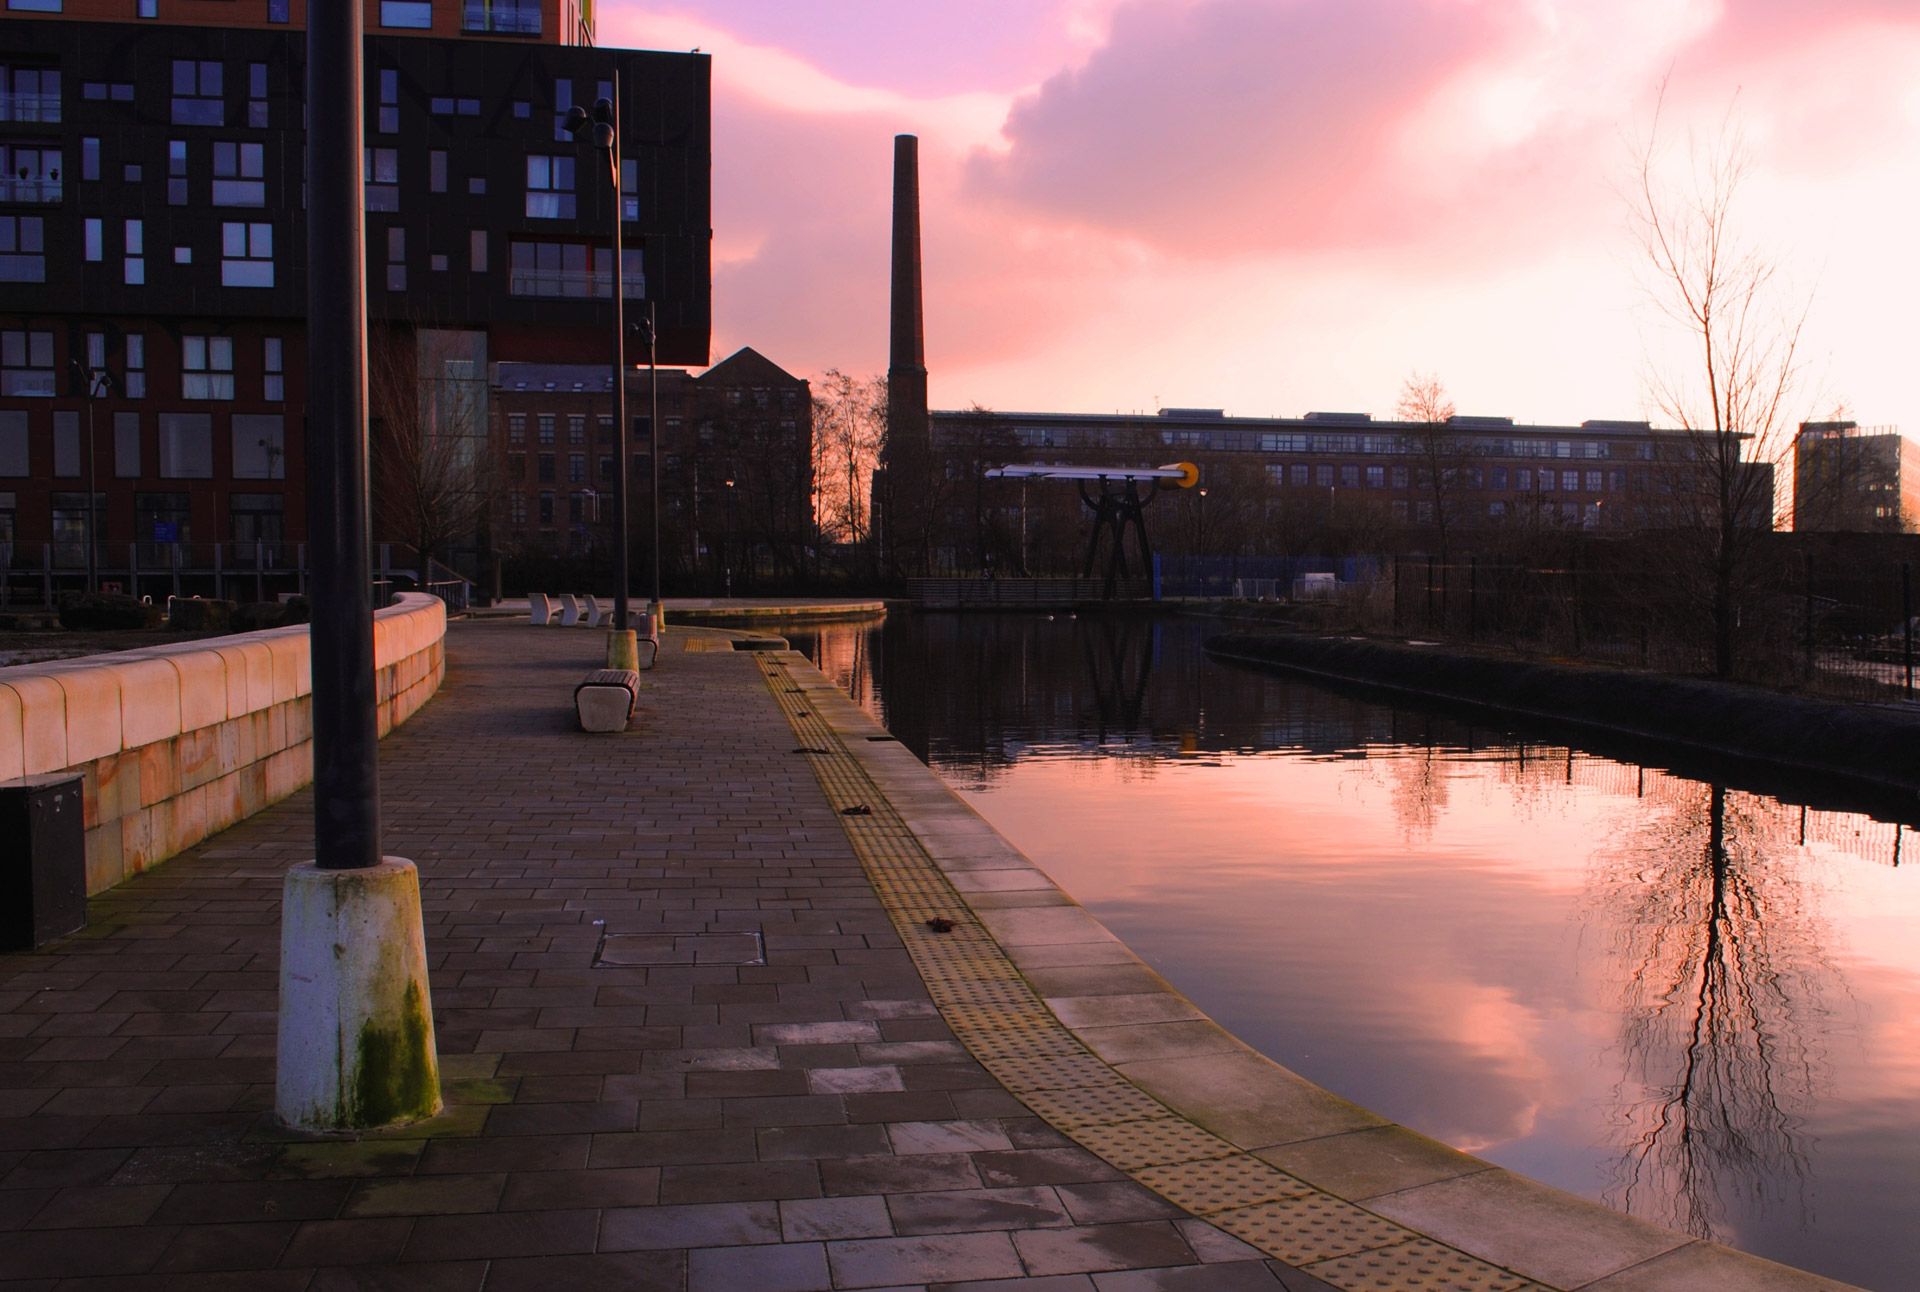 canal manchester evening free photo